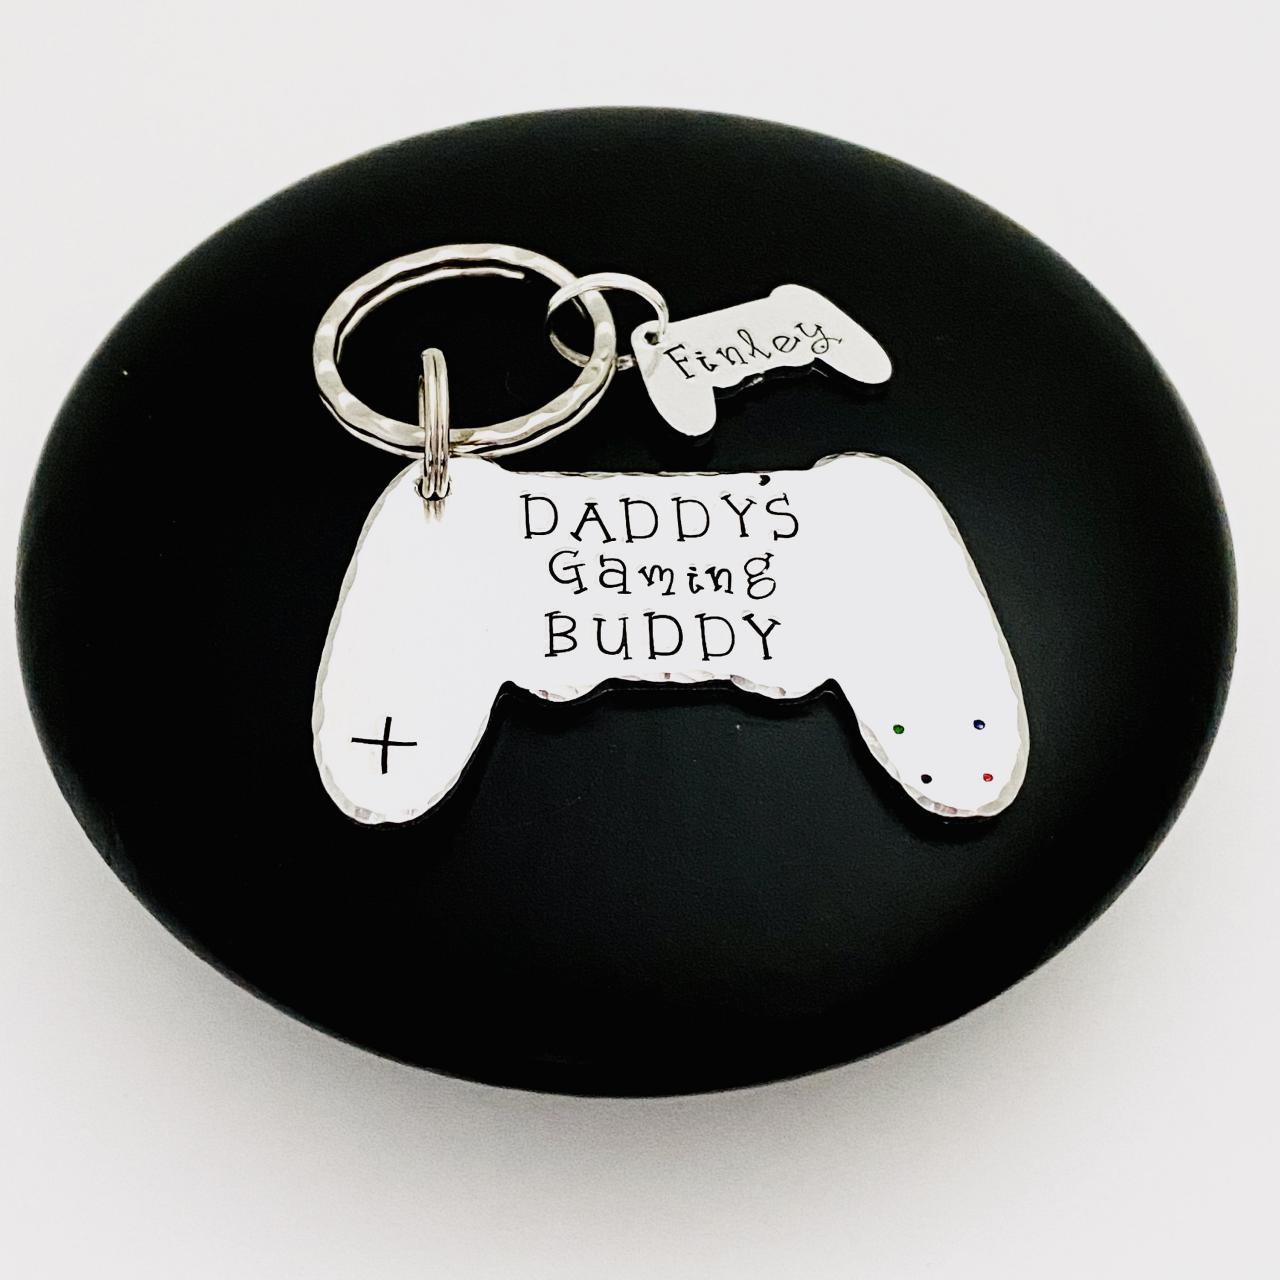 Daddy's Gaming Buddy Keyring, X Box Keychain, Fathers Day Gift, Dad Gift, Dad Keychain, Gift Off The Kids, Playstation Gift, Daddy